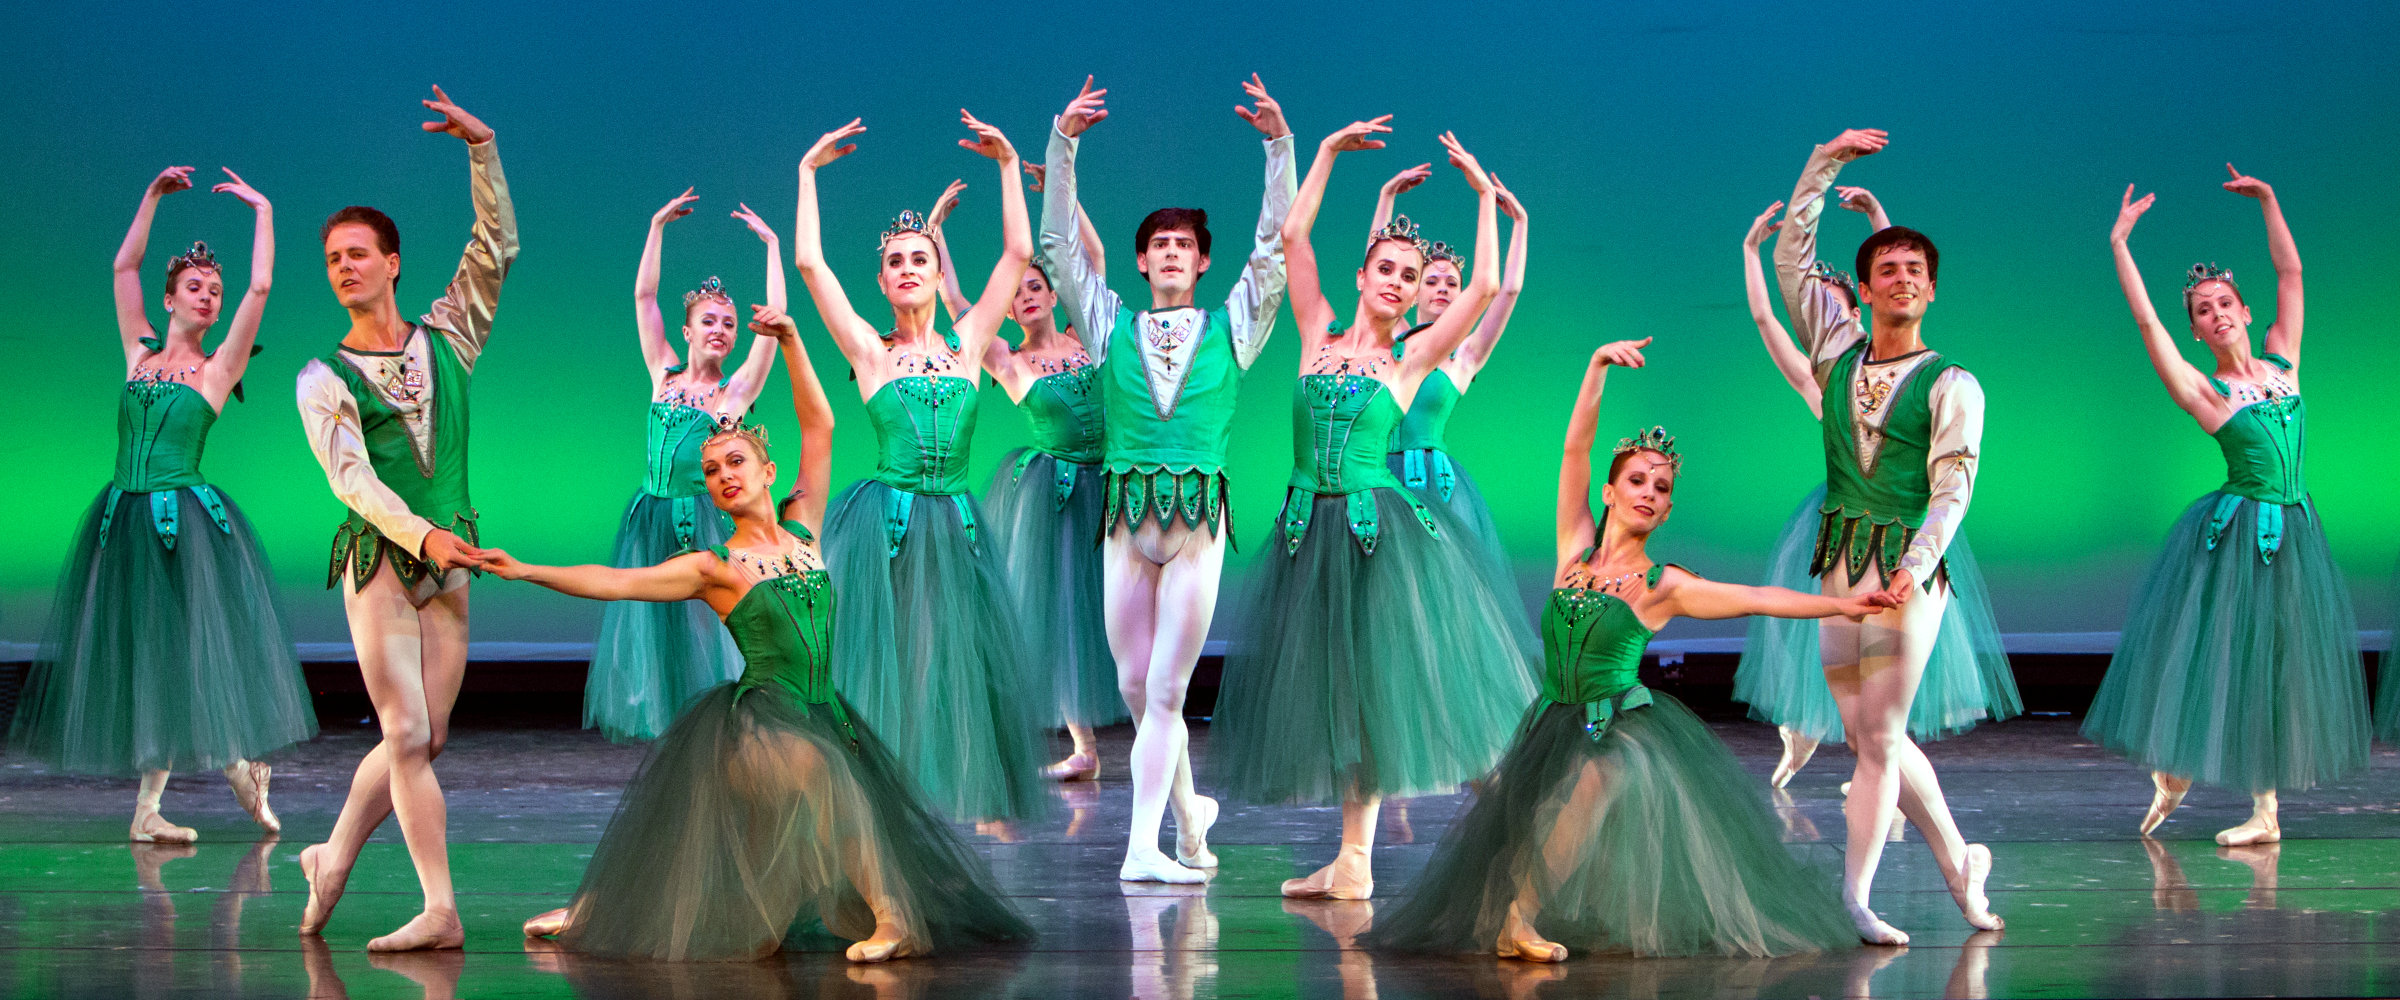 City Ballet of San Diego's performance of George Balanchine's EMERALDS, from the JEWELS ballet, on March 2, 2016